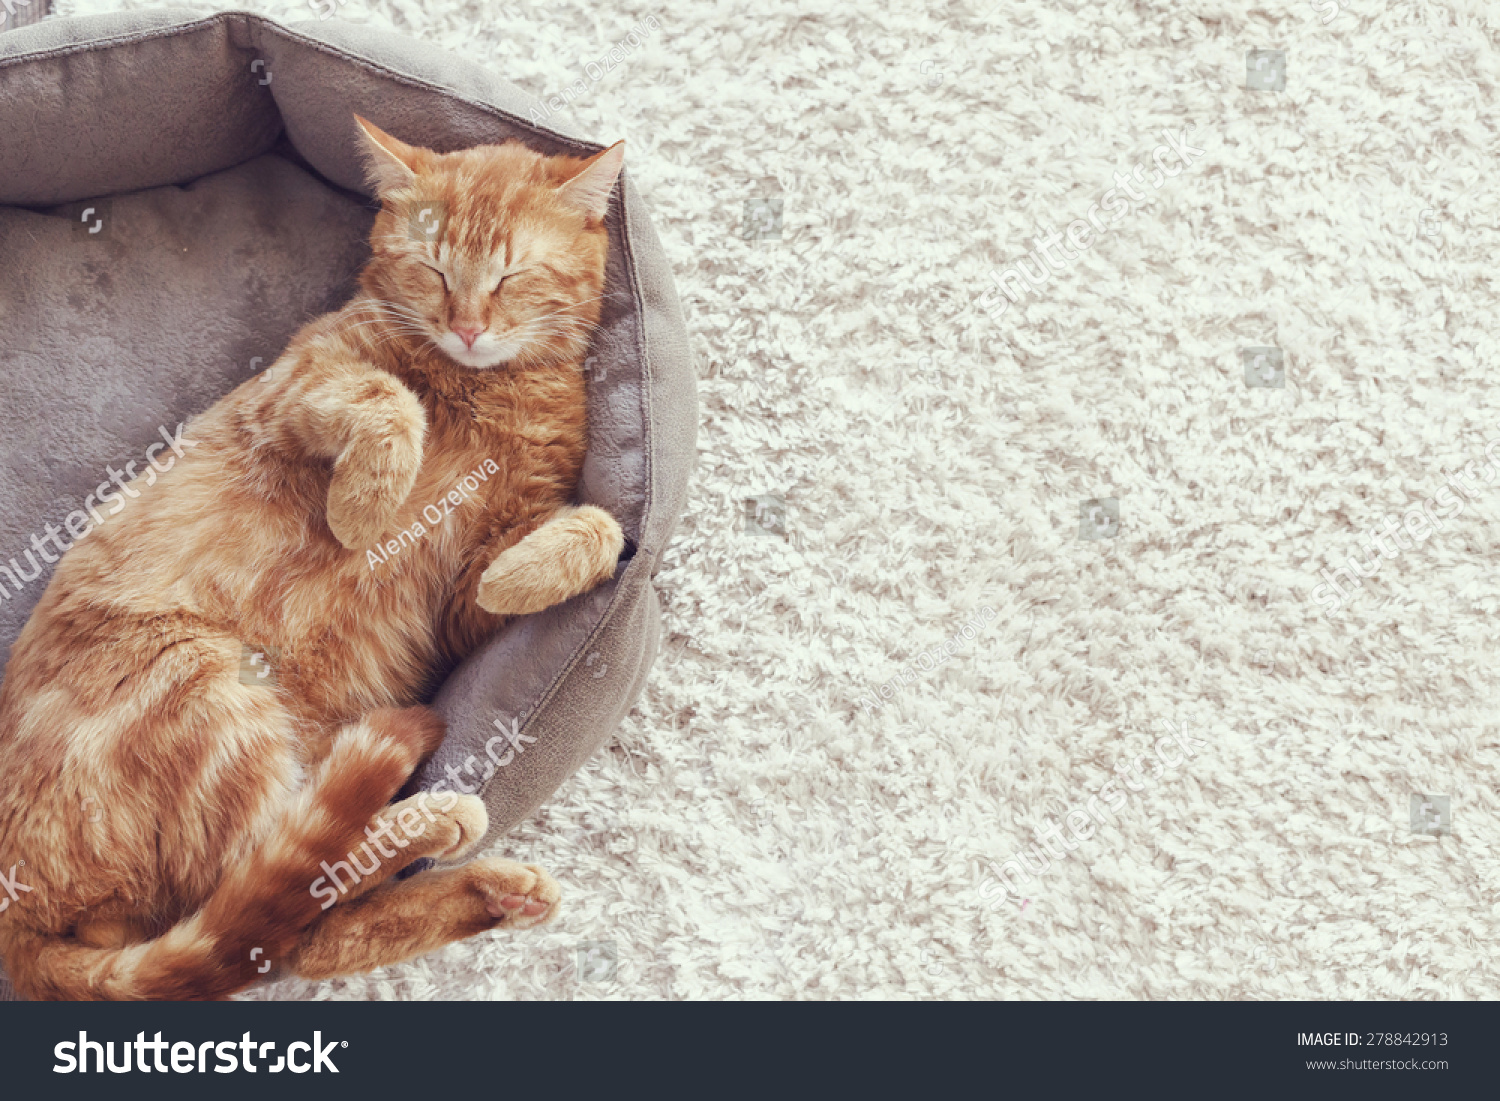 A ginger cat sleeps in his soft cozy bed on a floor carpet #278842913